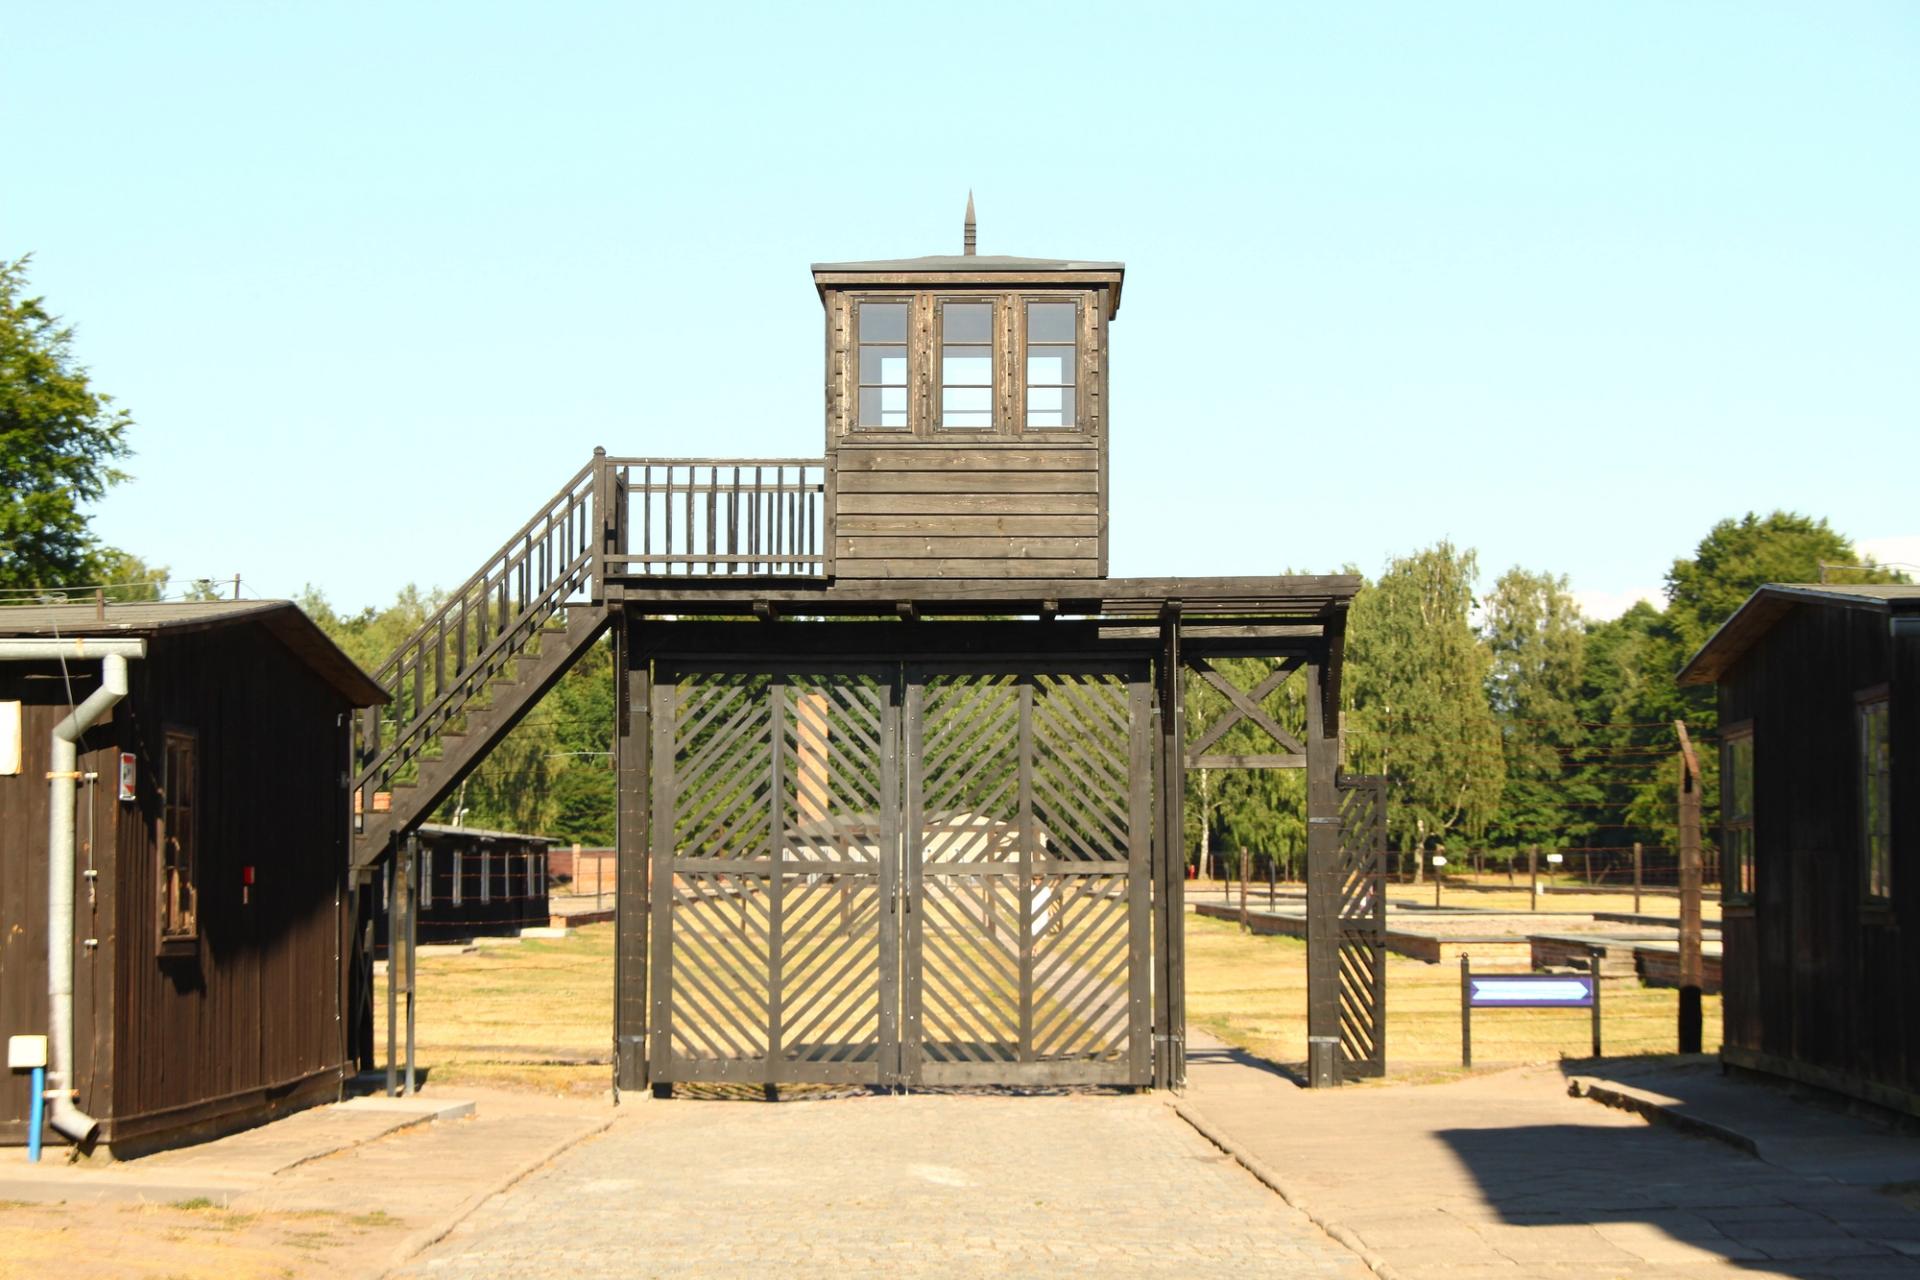 A photograph of the guard tower at Stutthof concentration camp.